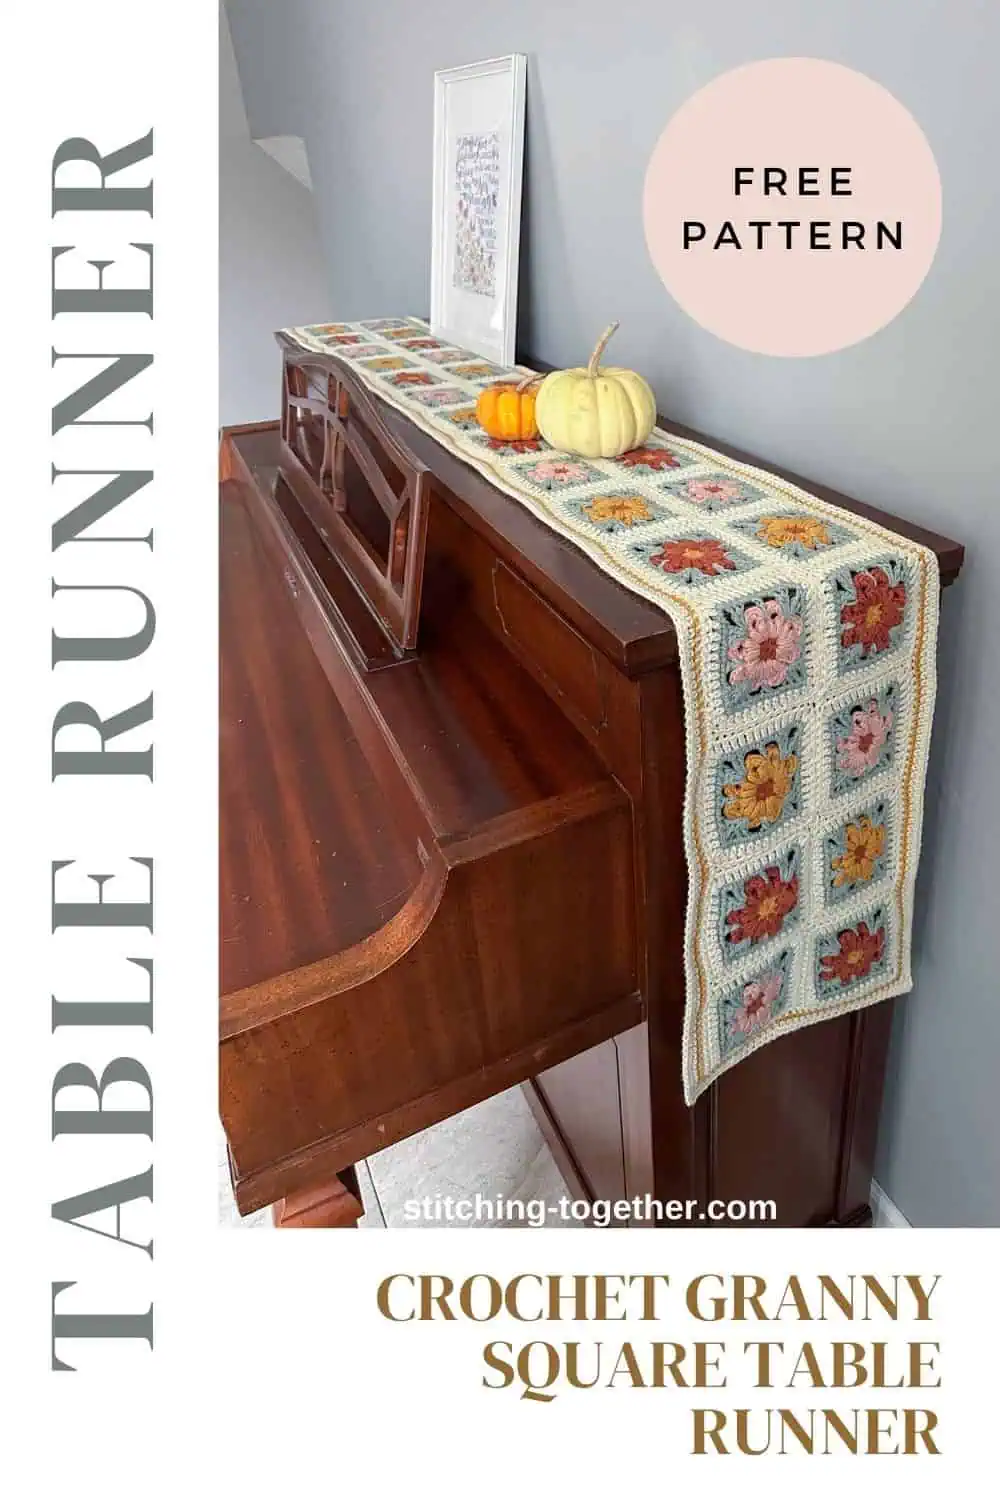 graphic with image of a crochet granny square table runner on the back of a piano and text reading "table runner, crochet granny square table runner, free pattern"